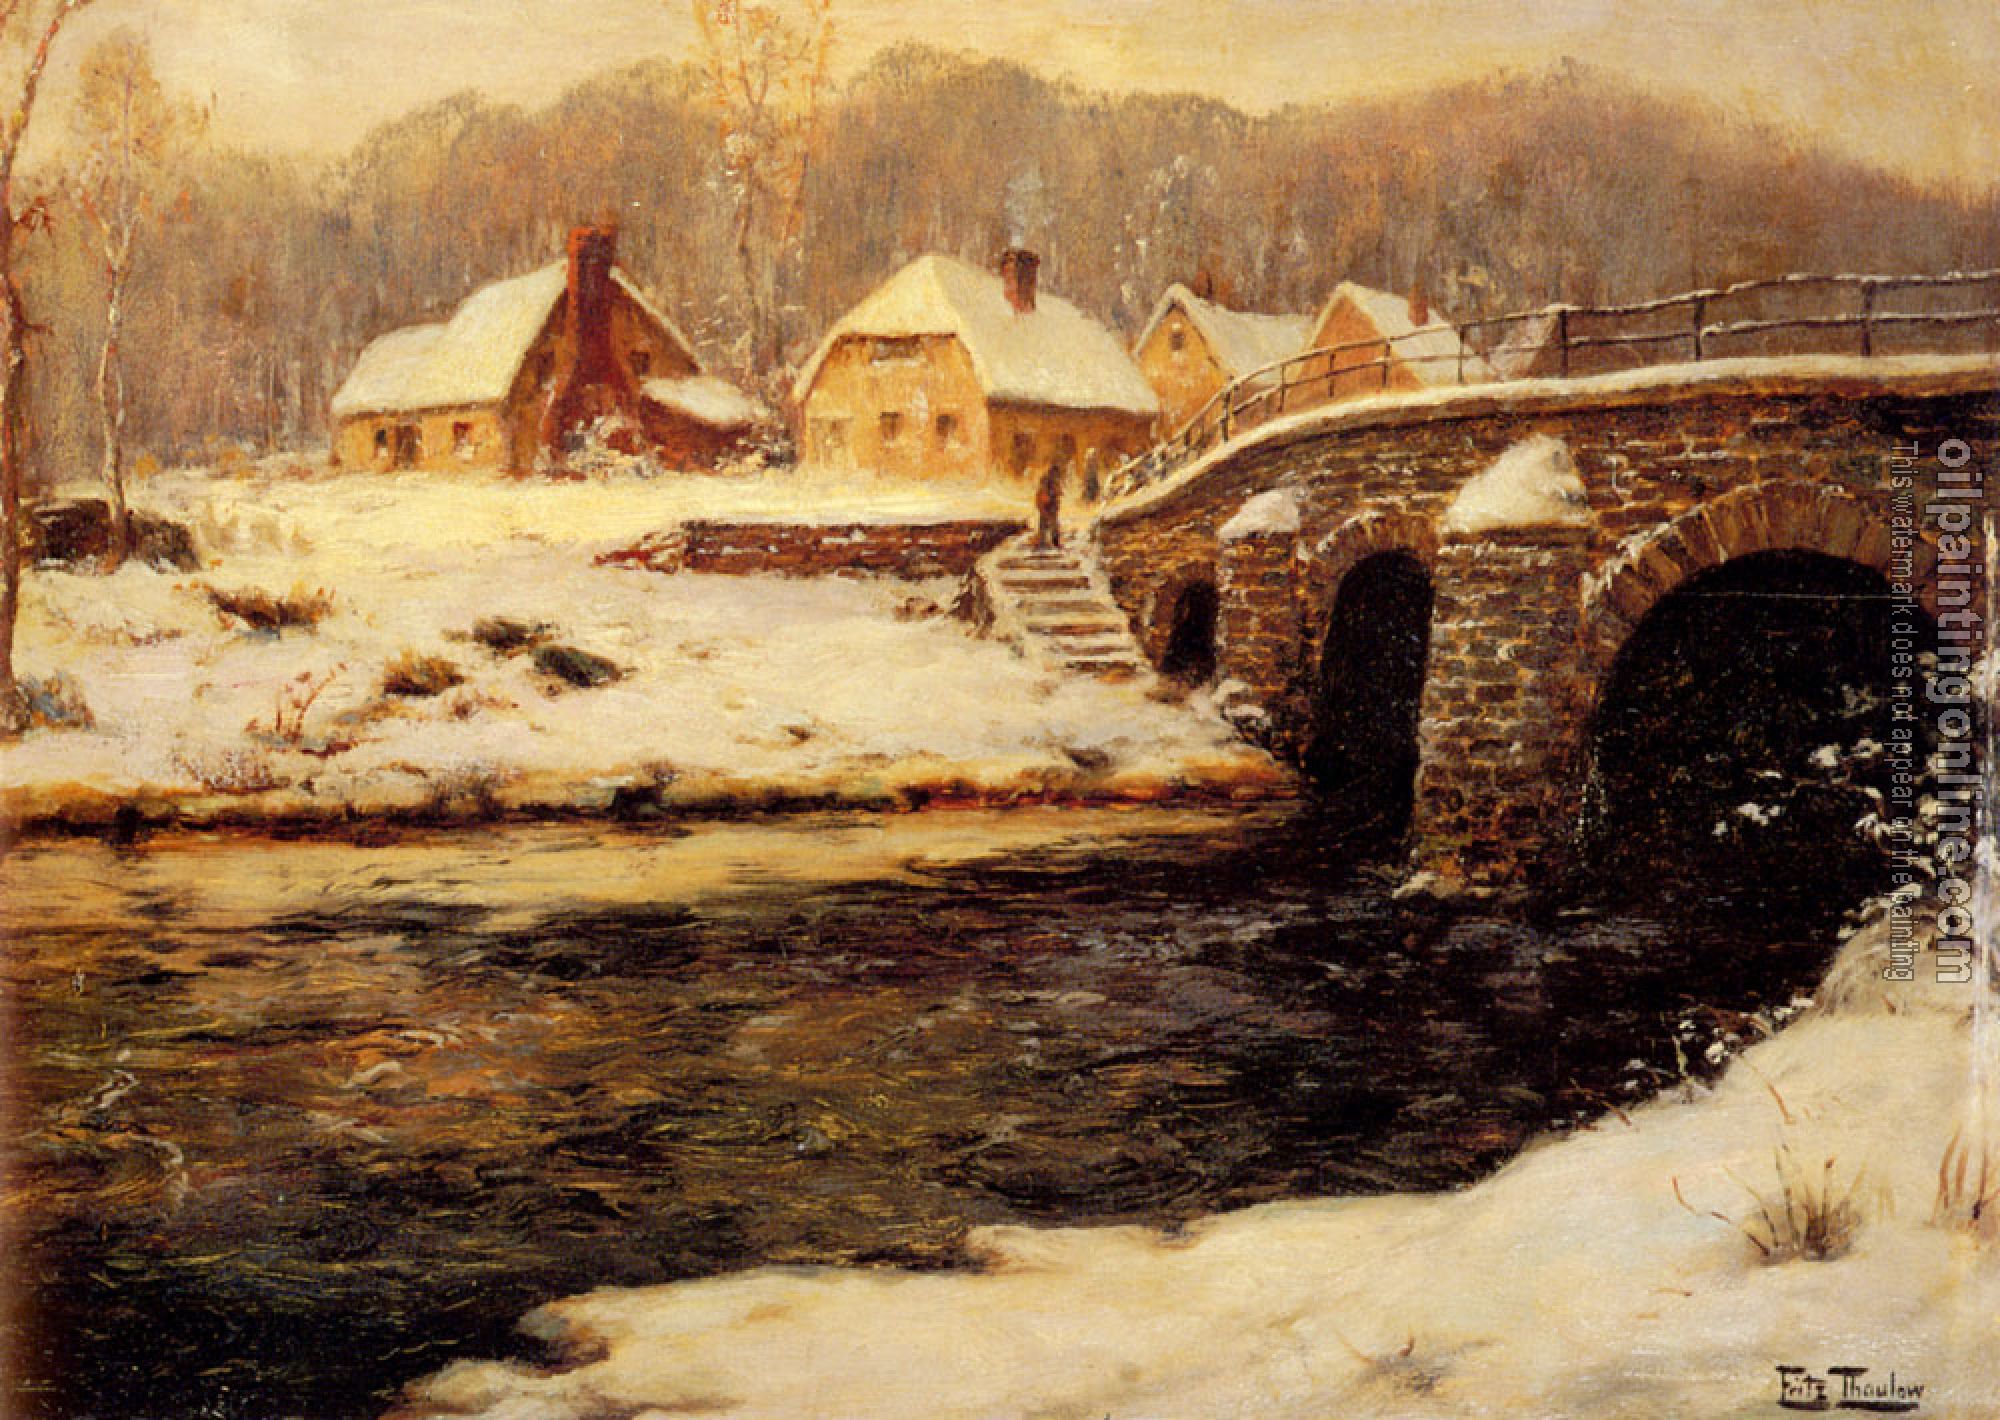 Thaulow, Frits - A Stone Bridge Over A Stream In Winter